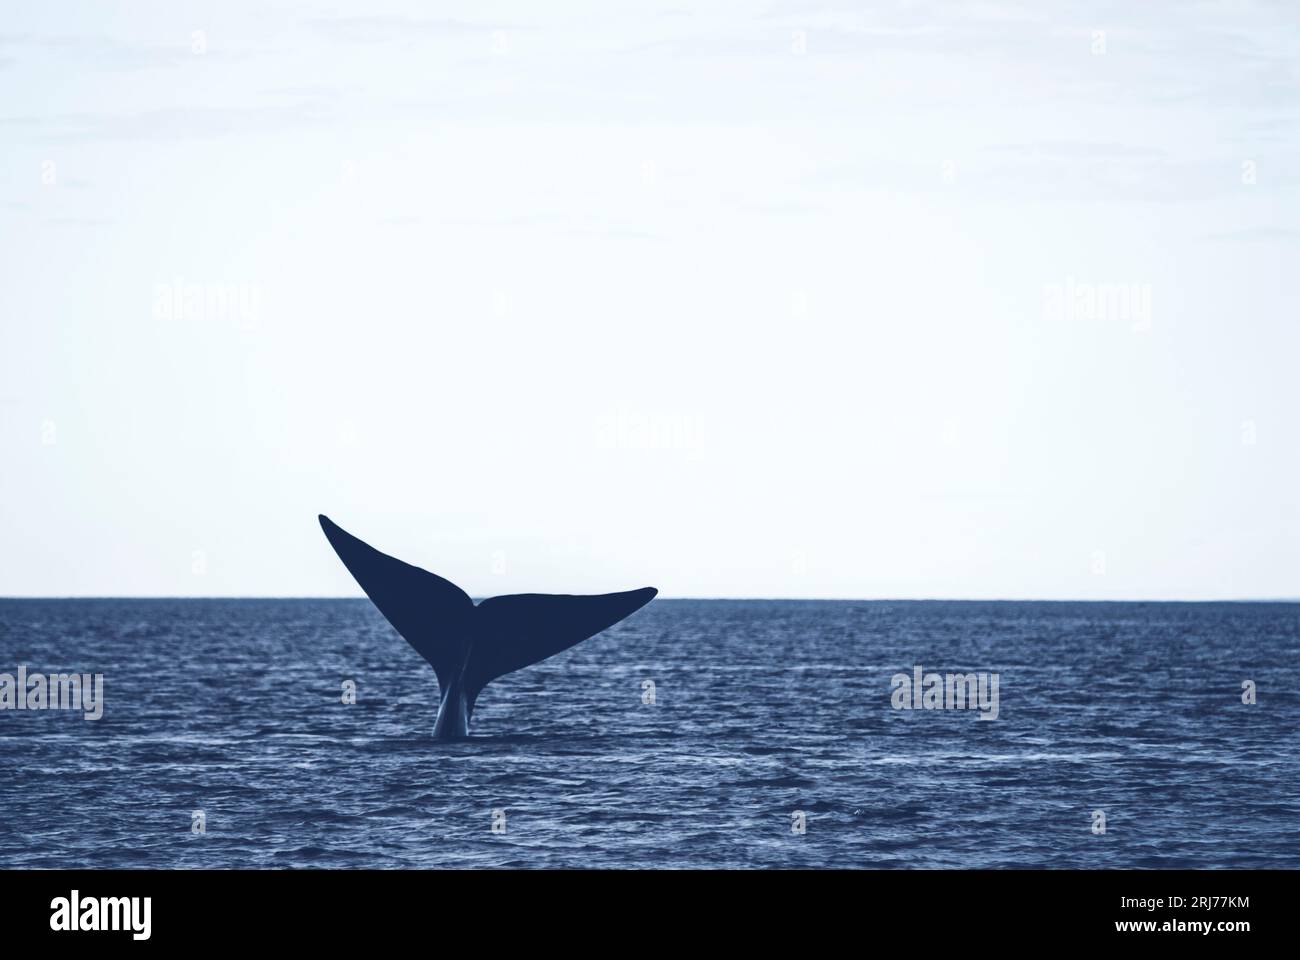 Southern right whale tail, Peninsula Valdes, Patagonia, Argentina. Stock Photo